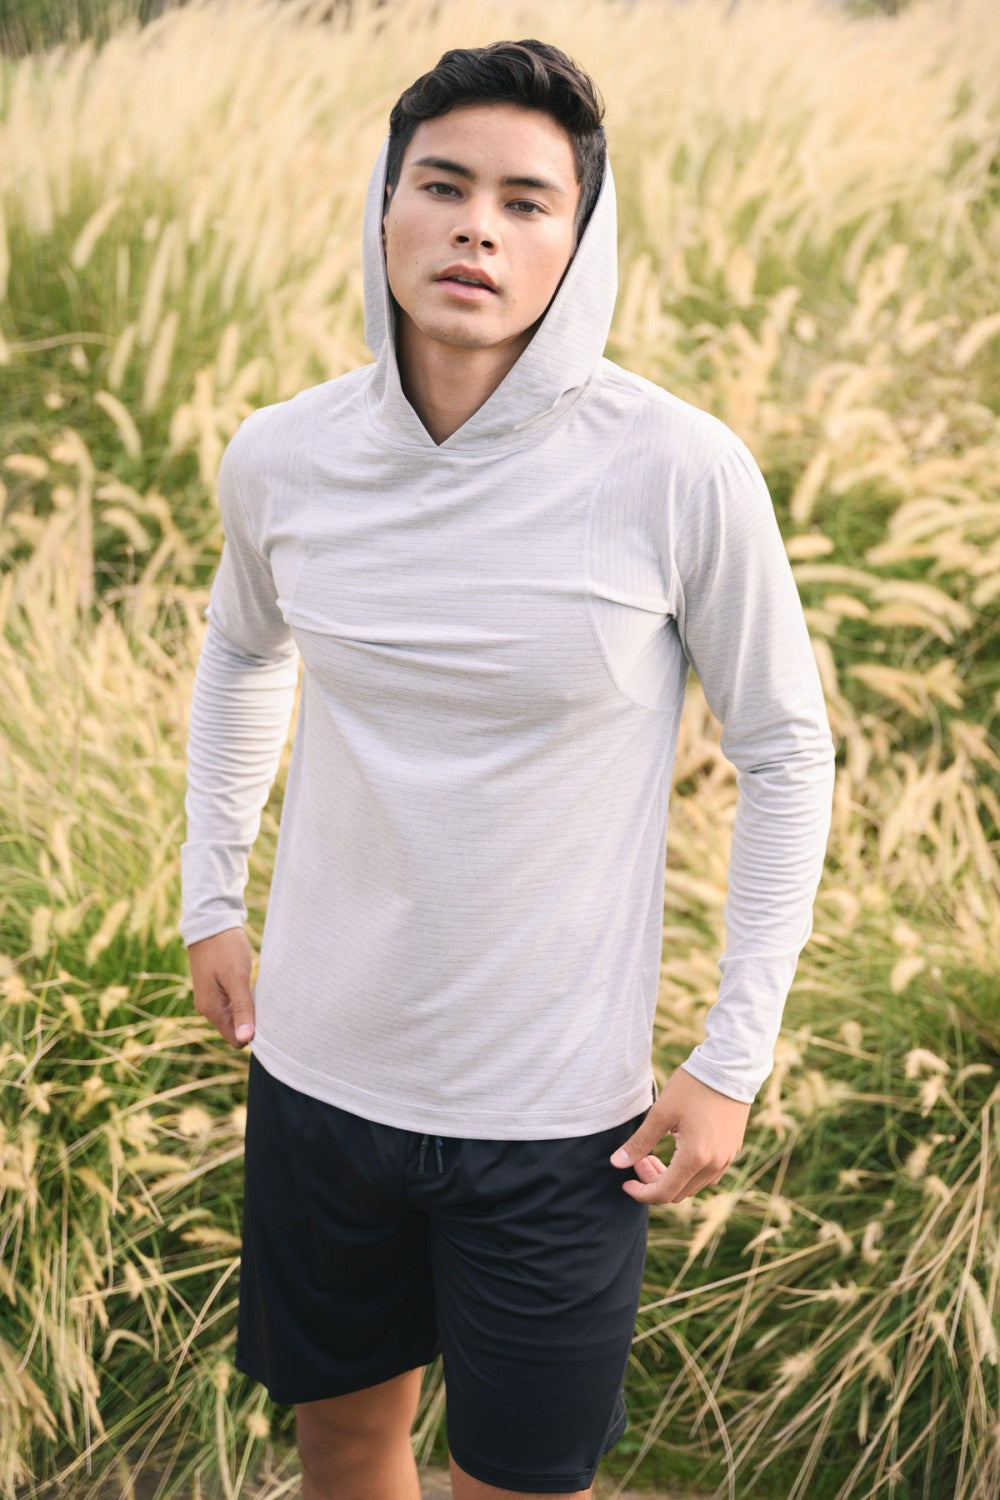 Hooded Move Pullover - Men's